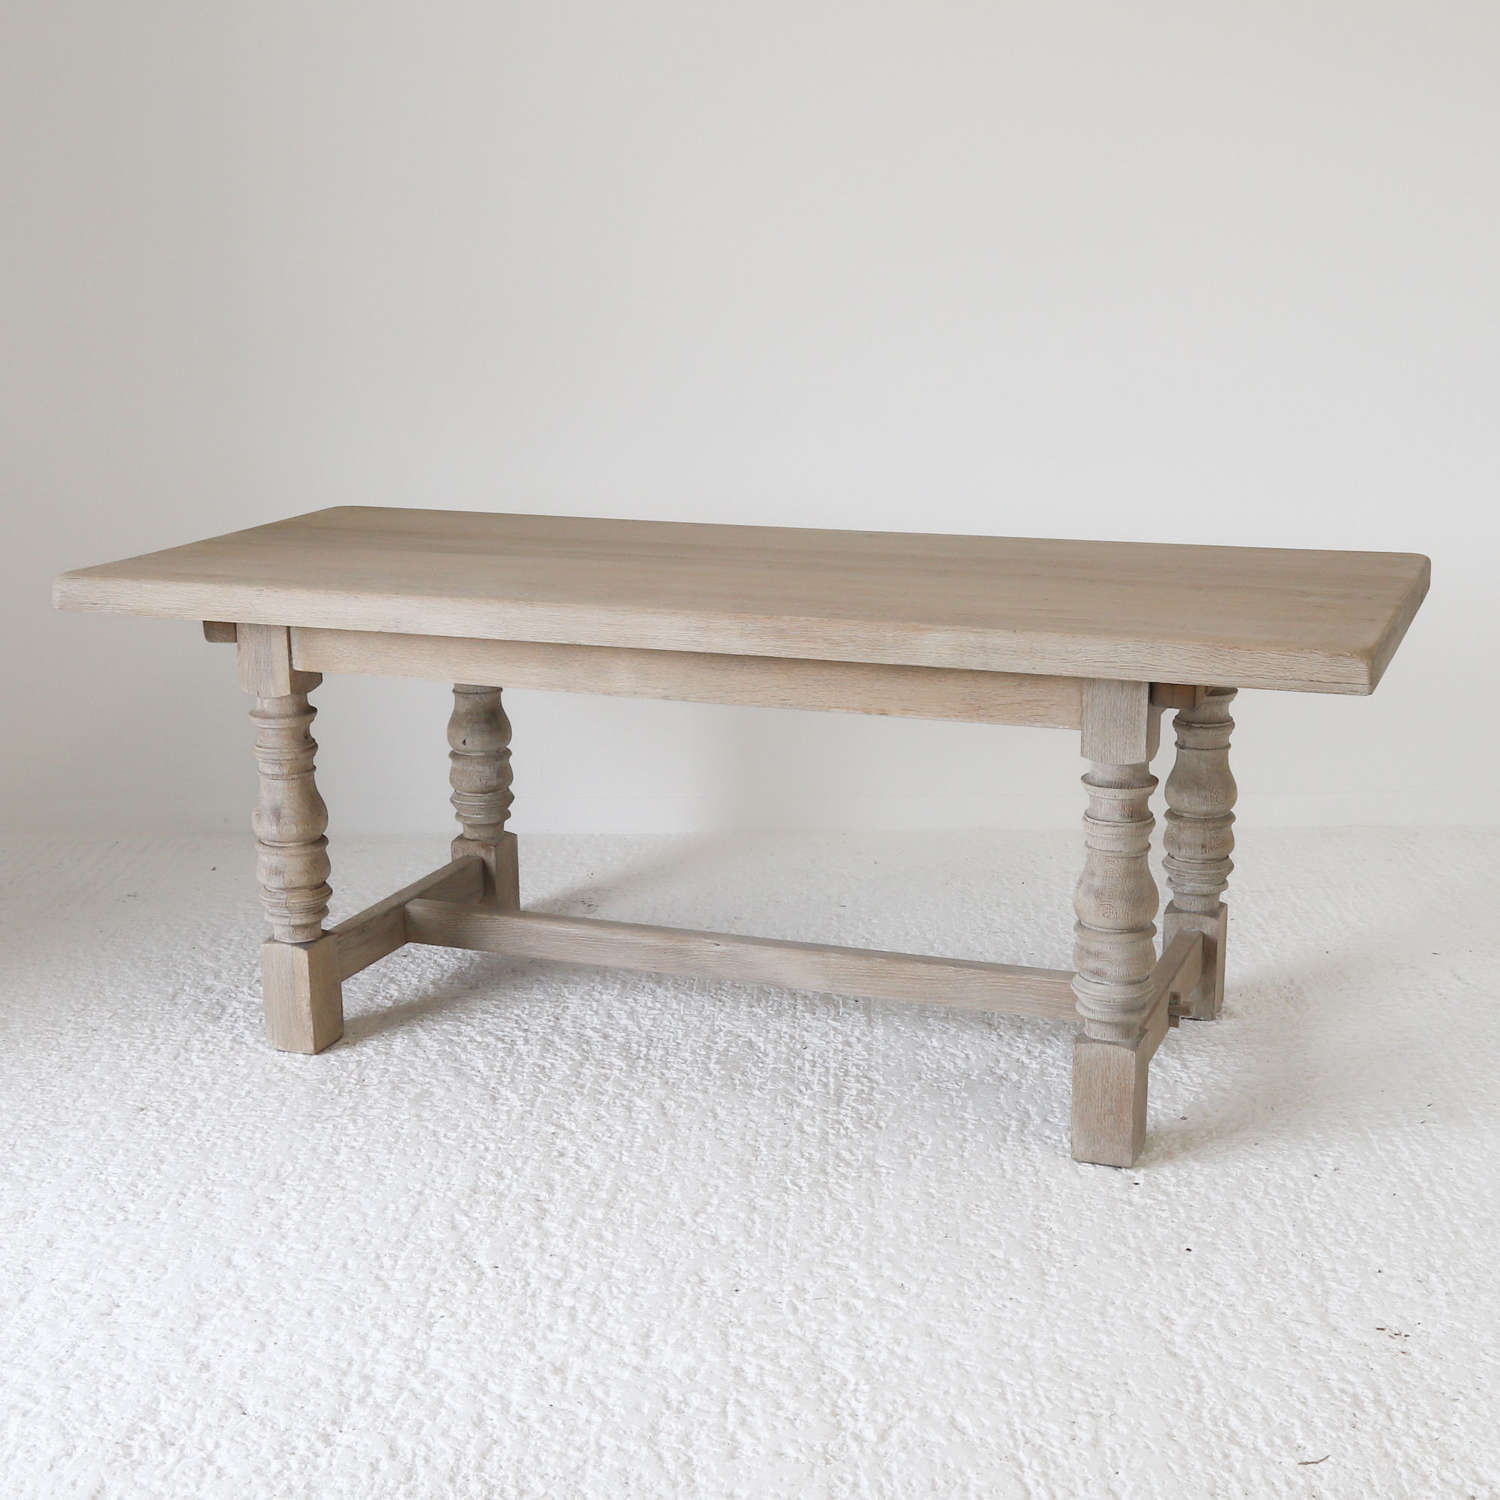 Bleached French Oak c 1930 Refectory Style Farmhouse Table sits 6-8